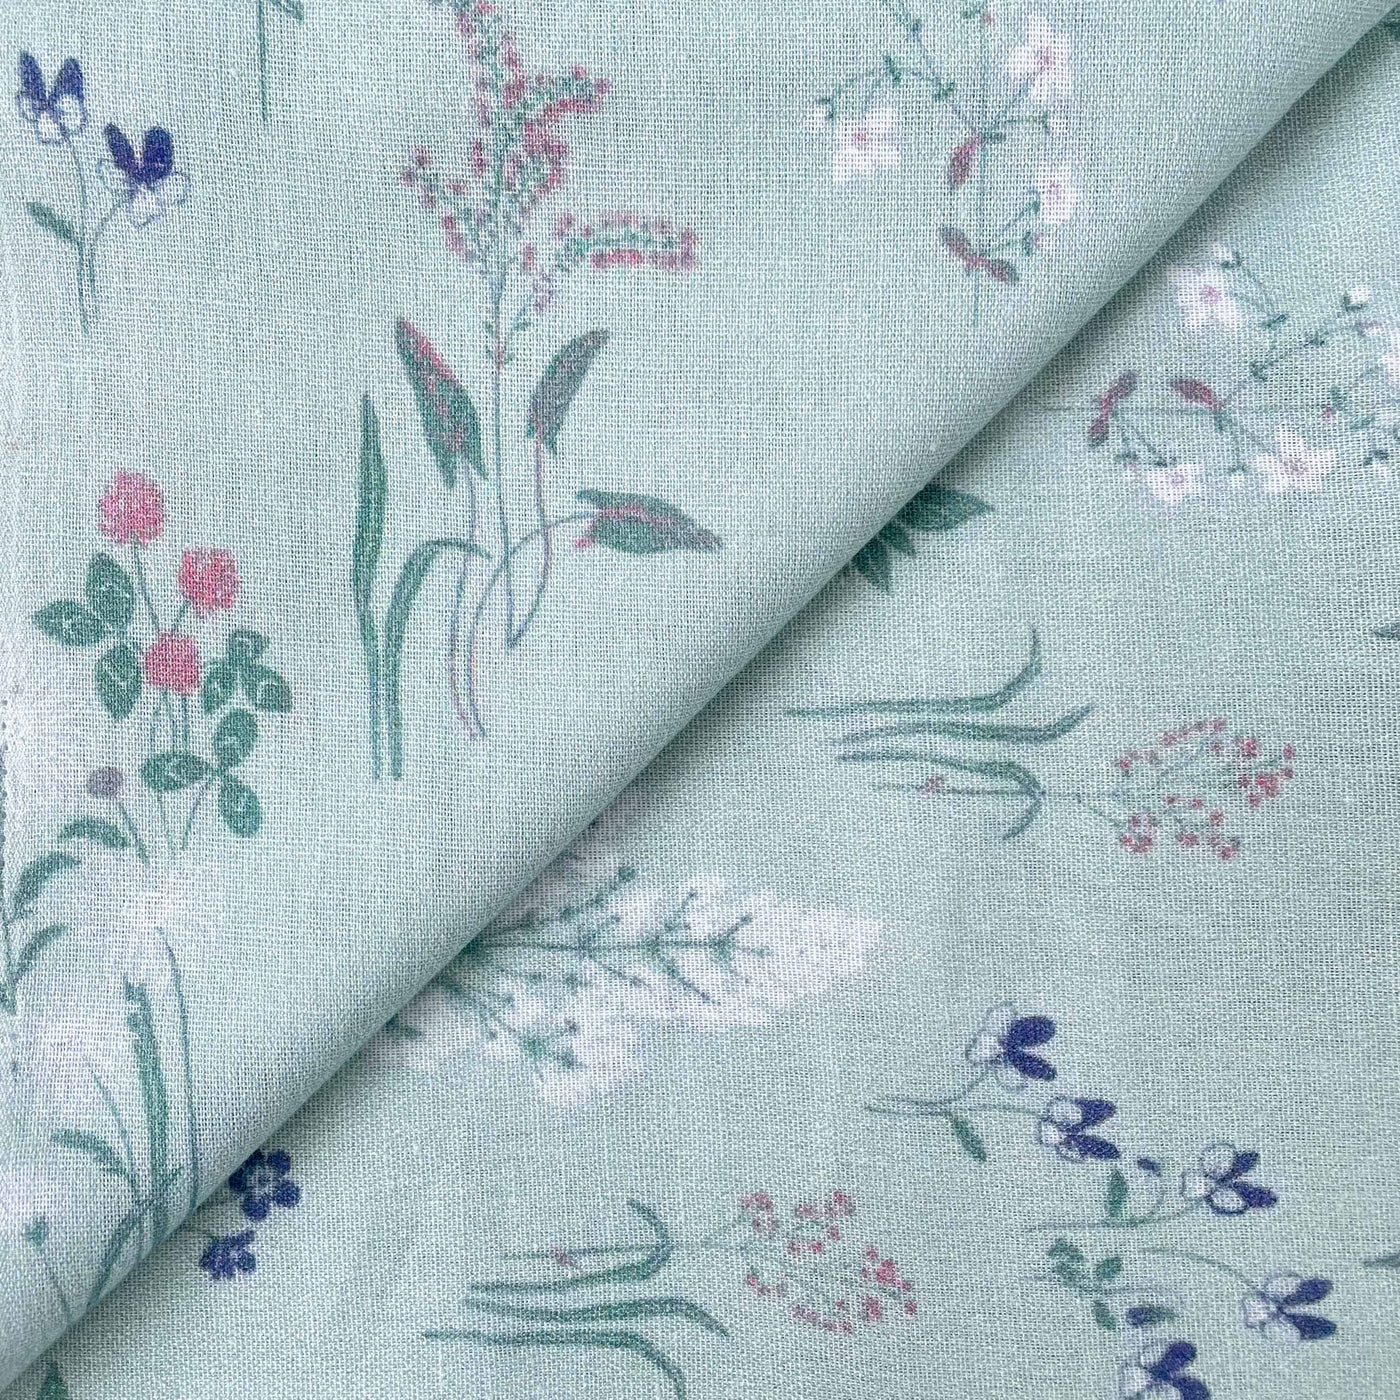 Printed Cotton Linen Fabric Cut Piece (CUT PIECE) Dusty Mint Green Timeless Botanicals Printed Pure Cotton Linen Fabric (Width 44 Inches)